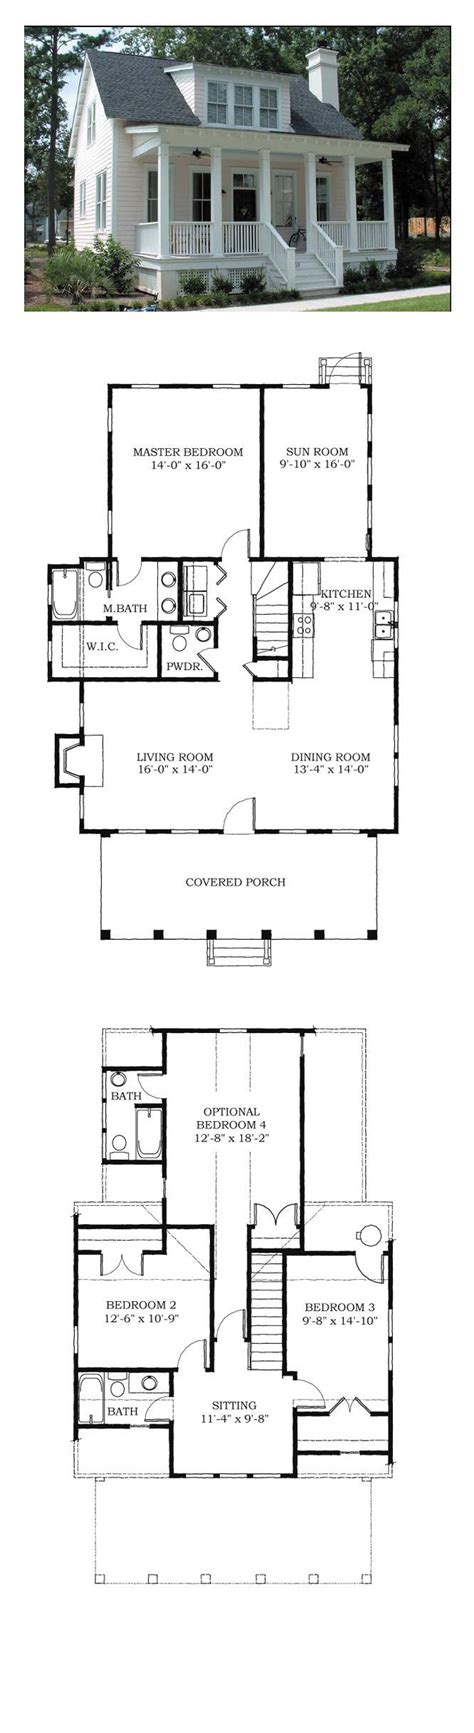 floor plans small home  level images  pinterest homes home  architecture